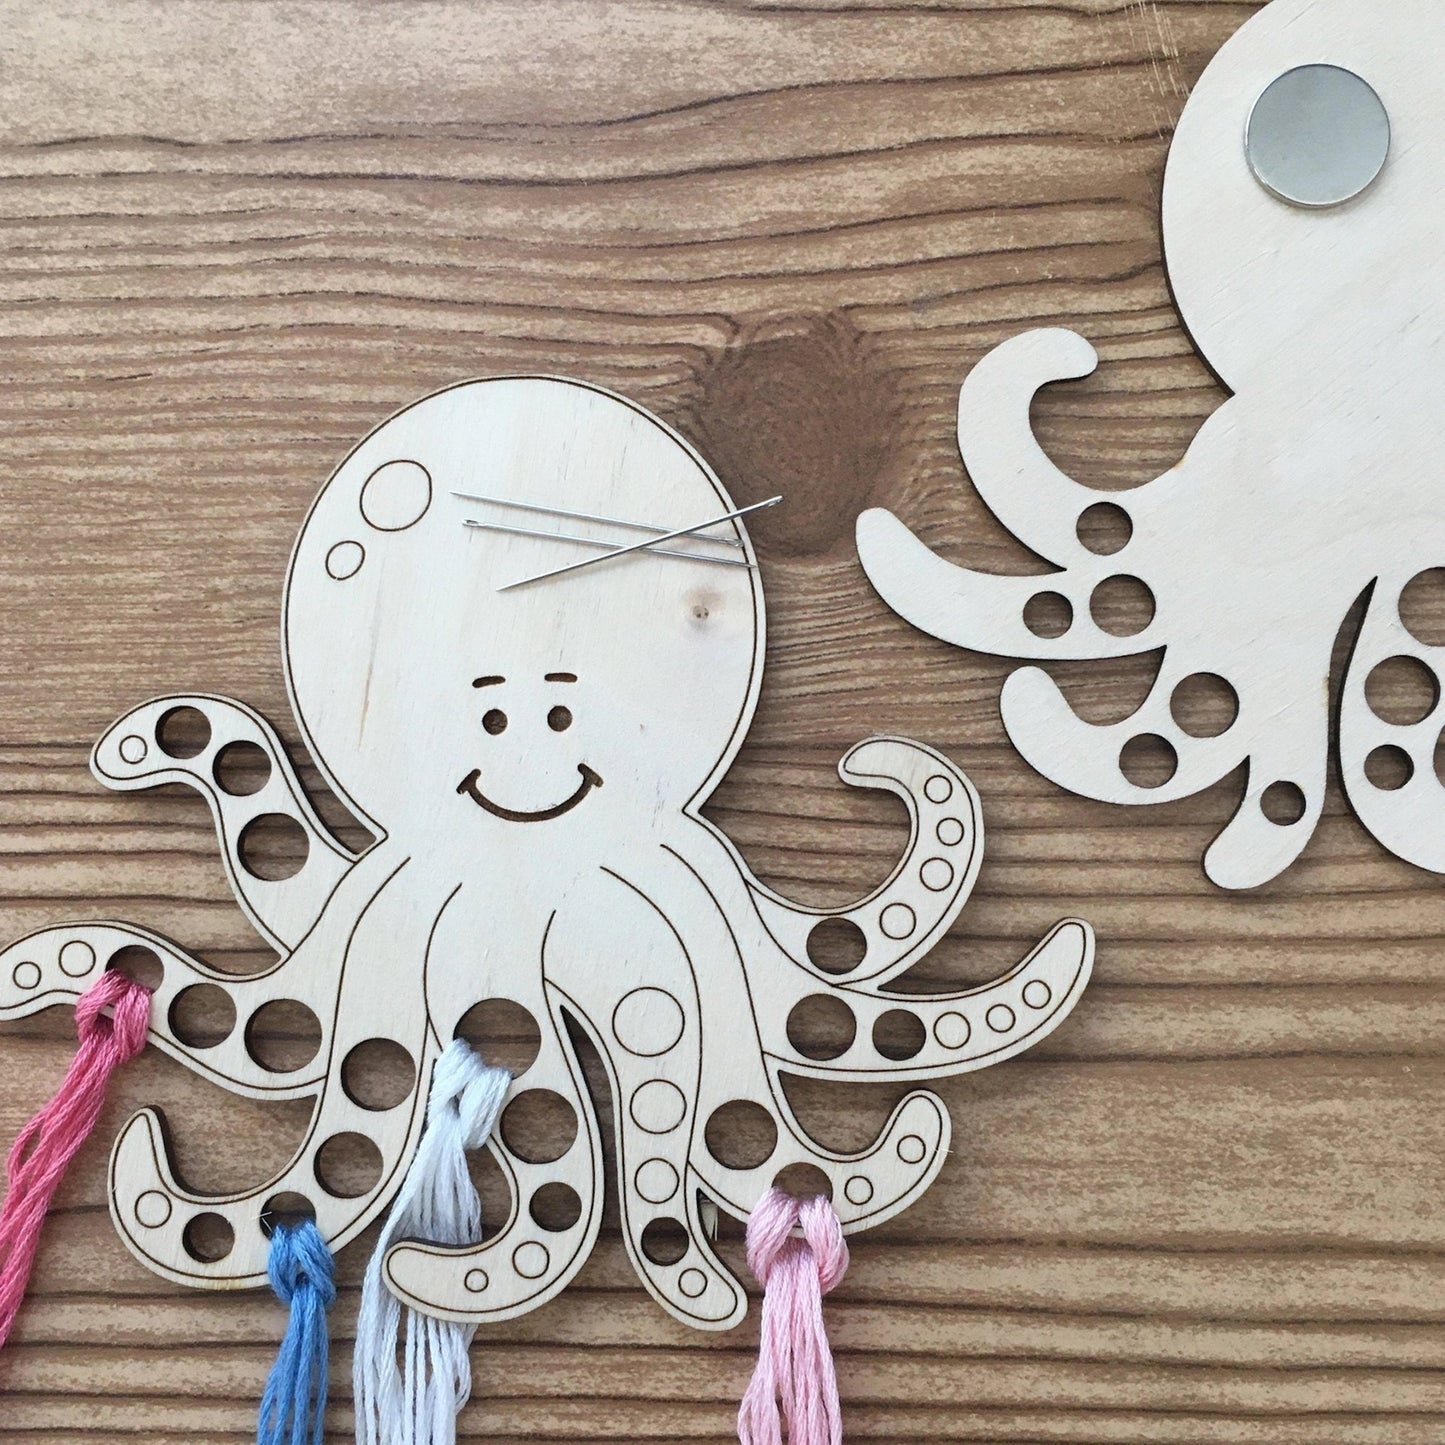 Magnetic Octopus Embroidery Floss Organizer and Needle Minder